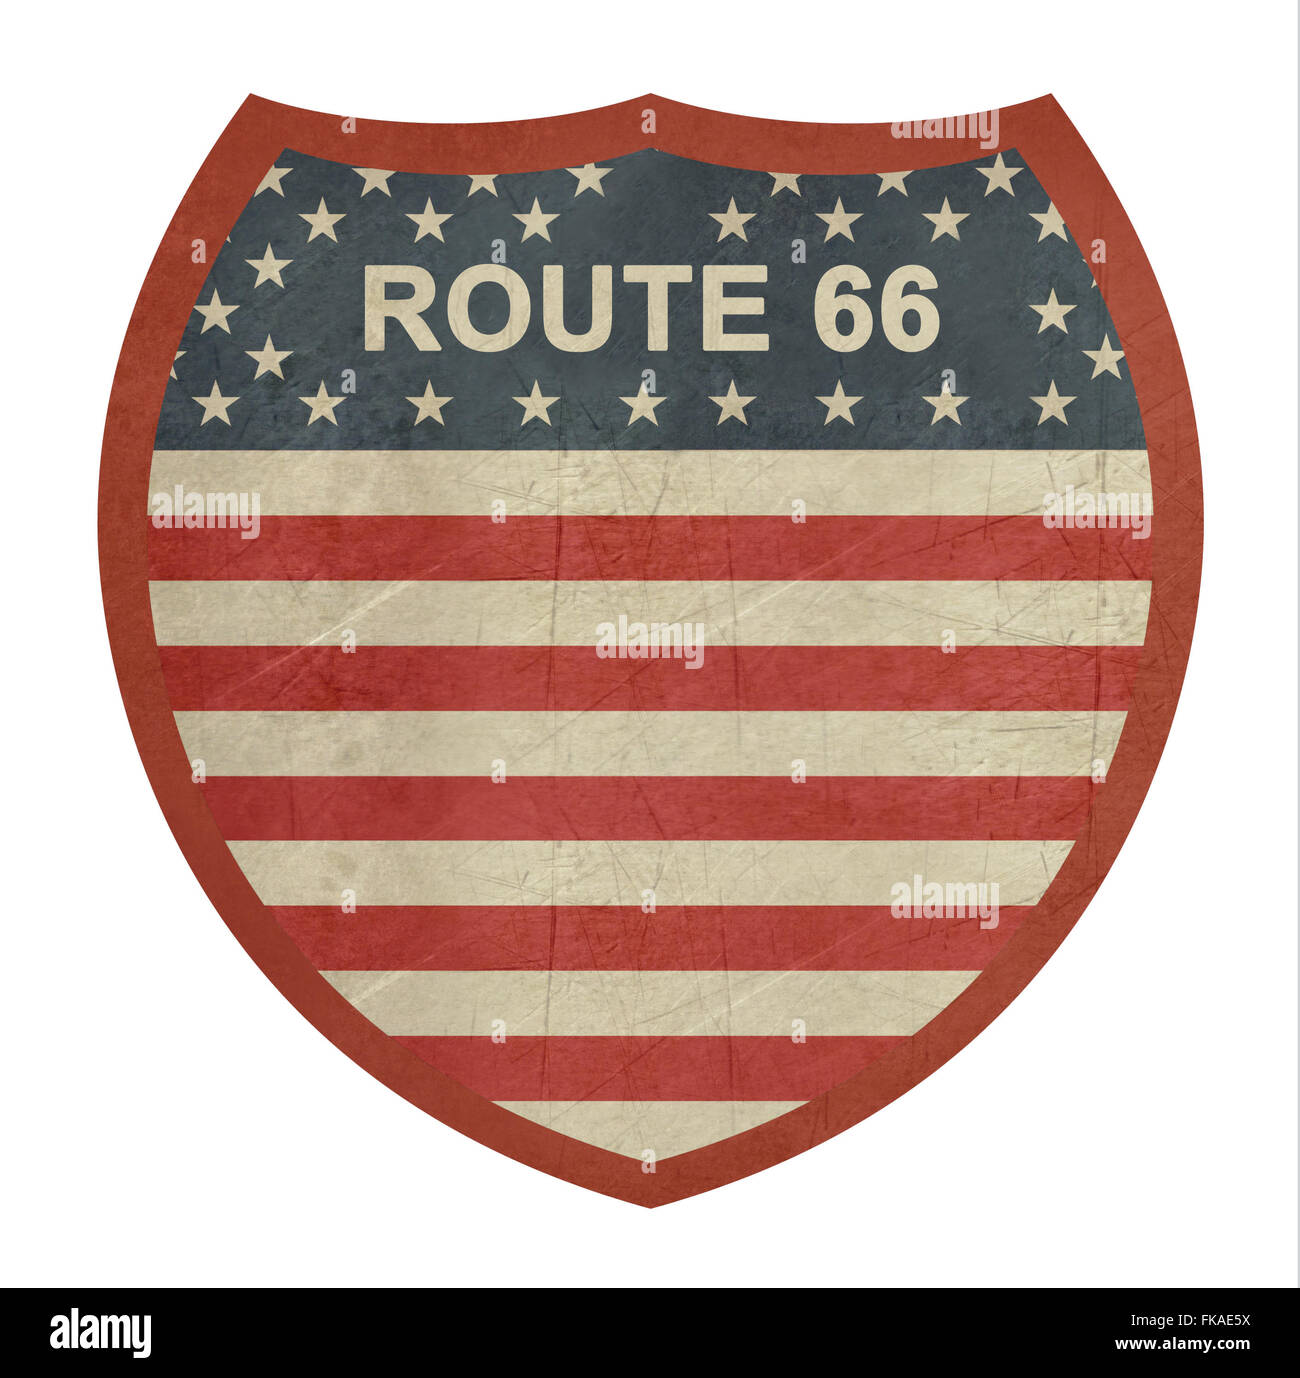 Grunge American route 66 highway sign isolated on a white background. Stock Photo